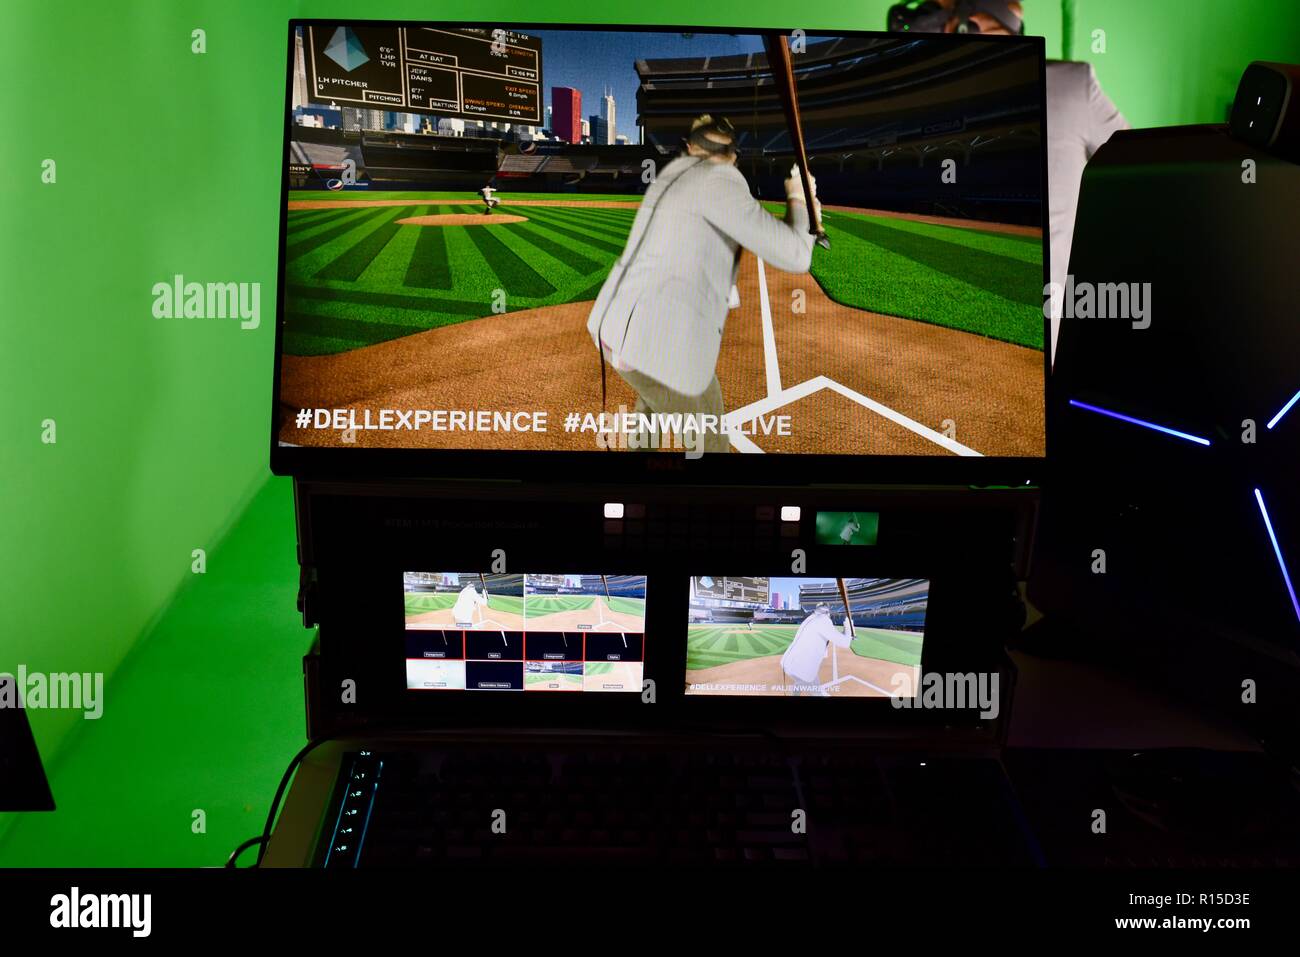 'Dell Experience' playing baseball virtual reality CES (Consumer Electronics Show), the world’s largest technology trade show, held in Las Vegas, USA. Stock Photo